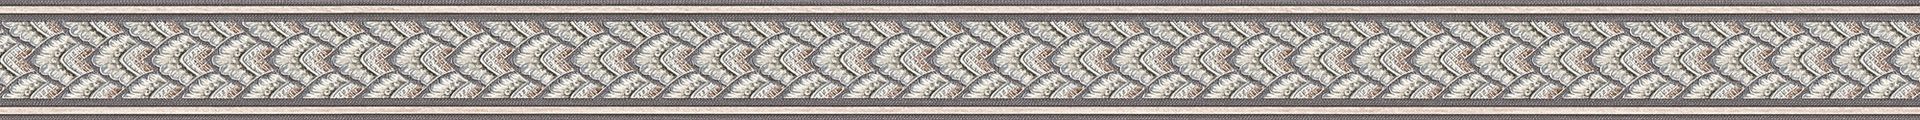 A.S. Création Only Borders 10, Barock Tapete, silber, beige 369154